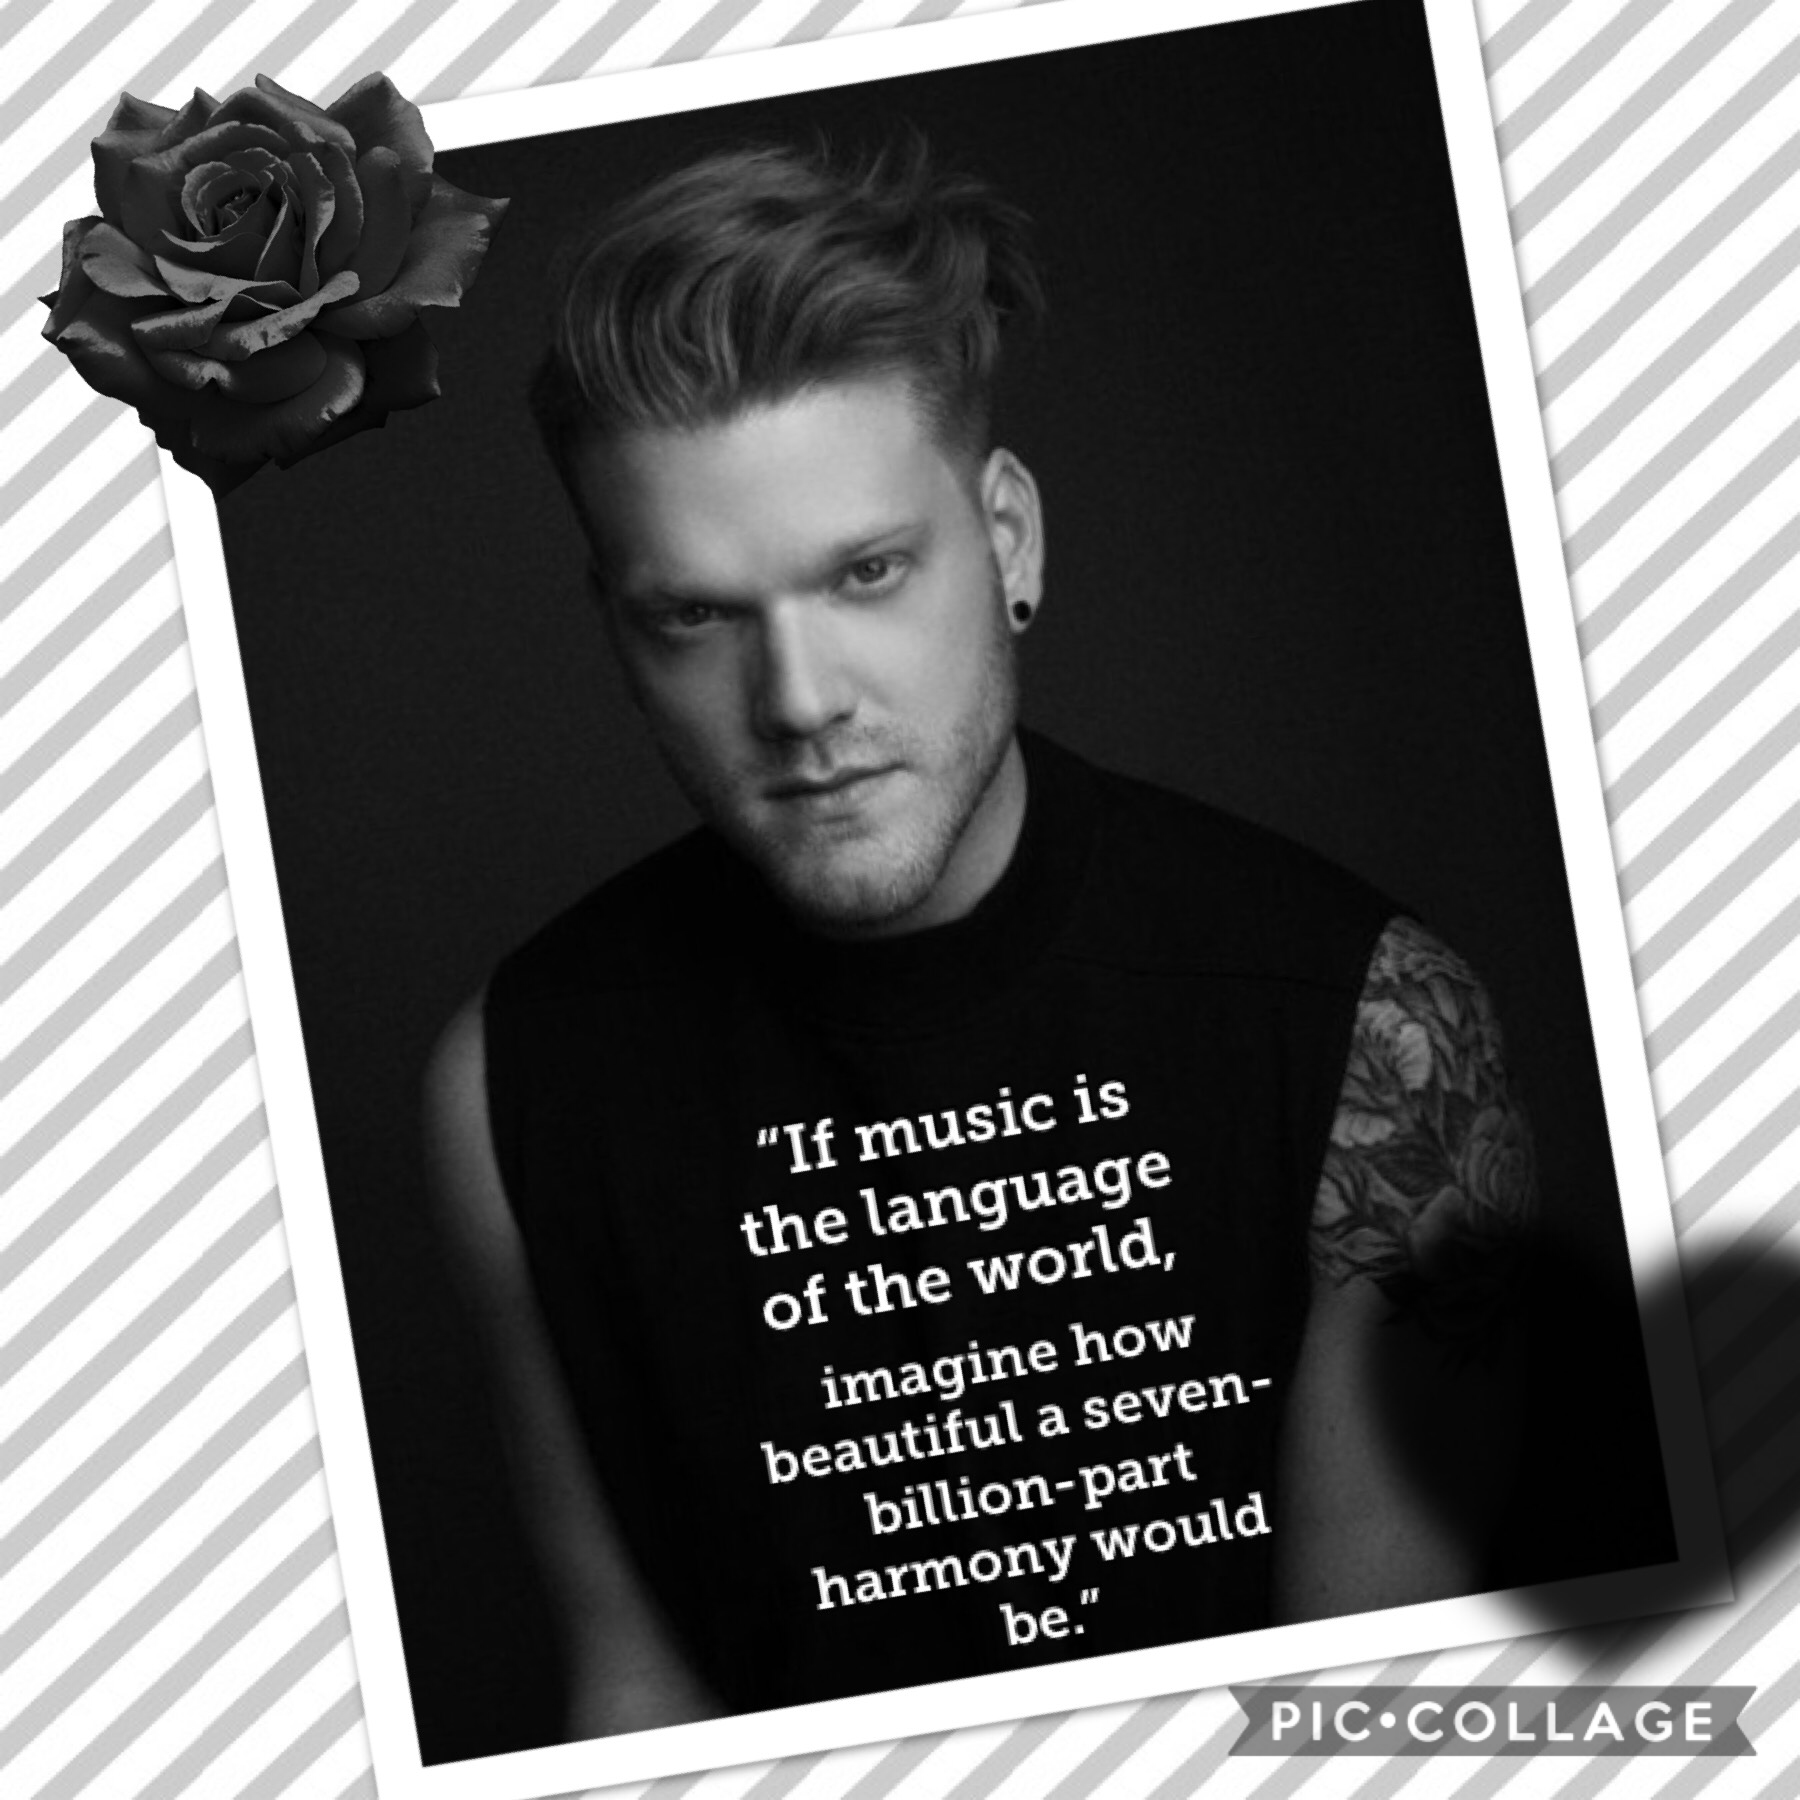 🖤tap🖤

This ones for Scott Hoying. He, also part of Pentatonix and Superfruit, is an amazing artist. He is openly gay and an icon in he lgbtq+ community. He’s the king of riffs and he’s so talented!